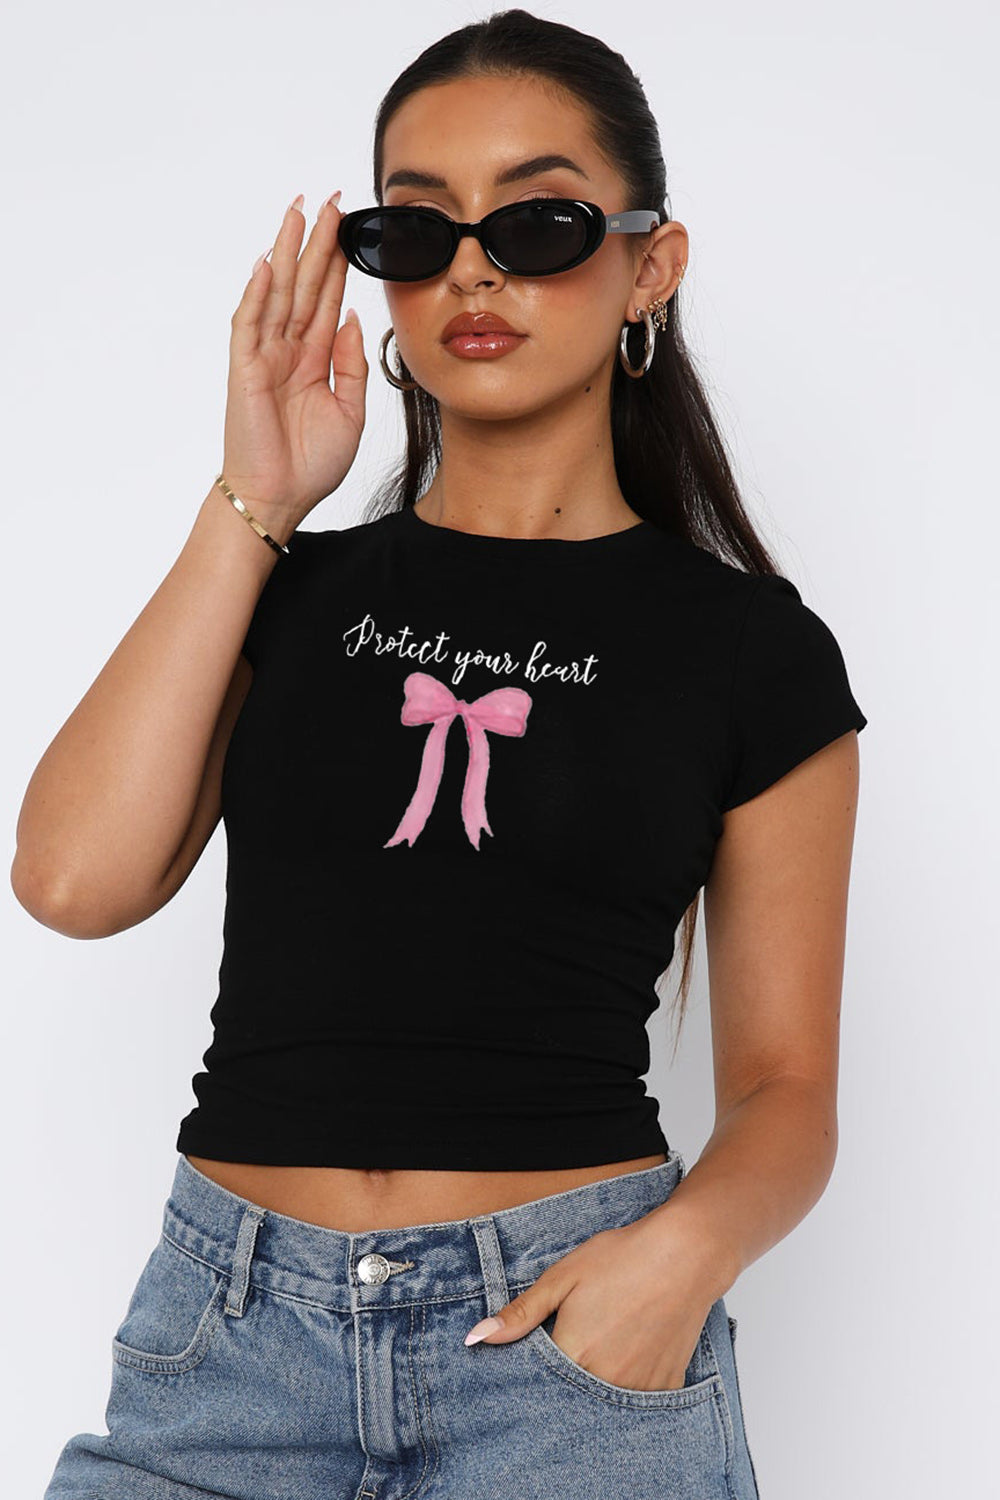 Bow Graphic Round Neck Short Sleeve T-Shirt